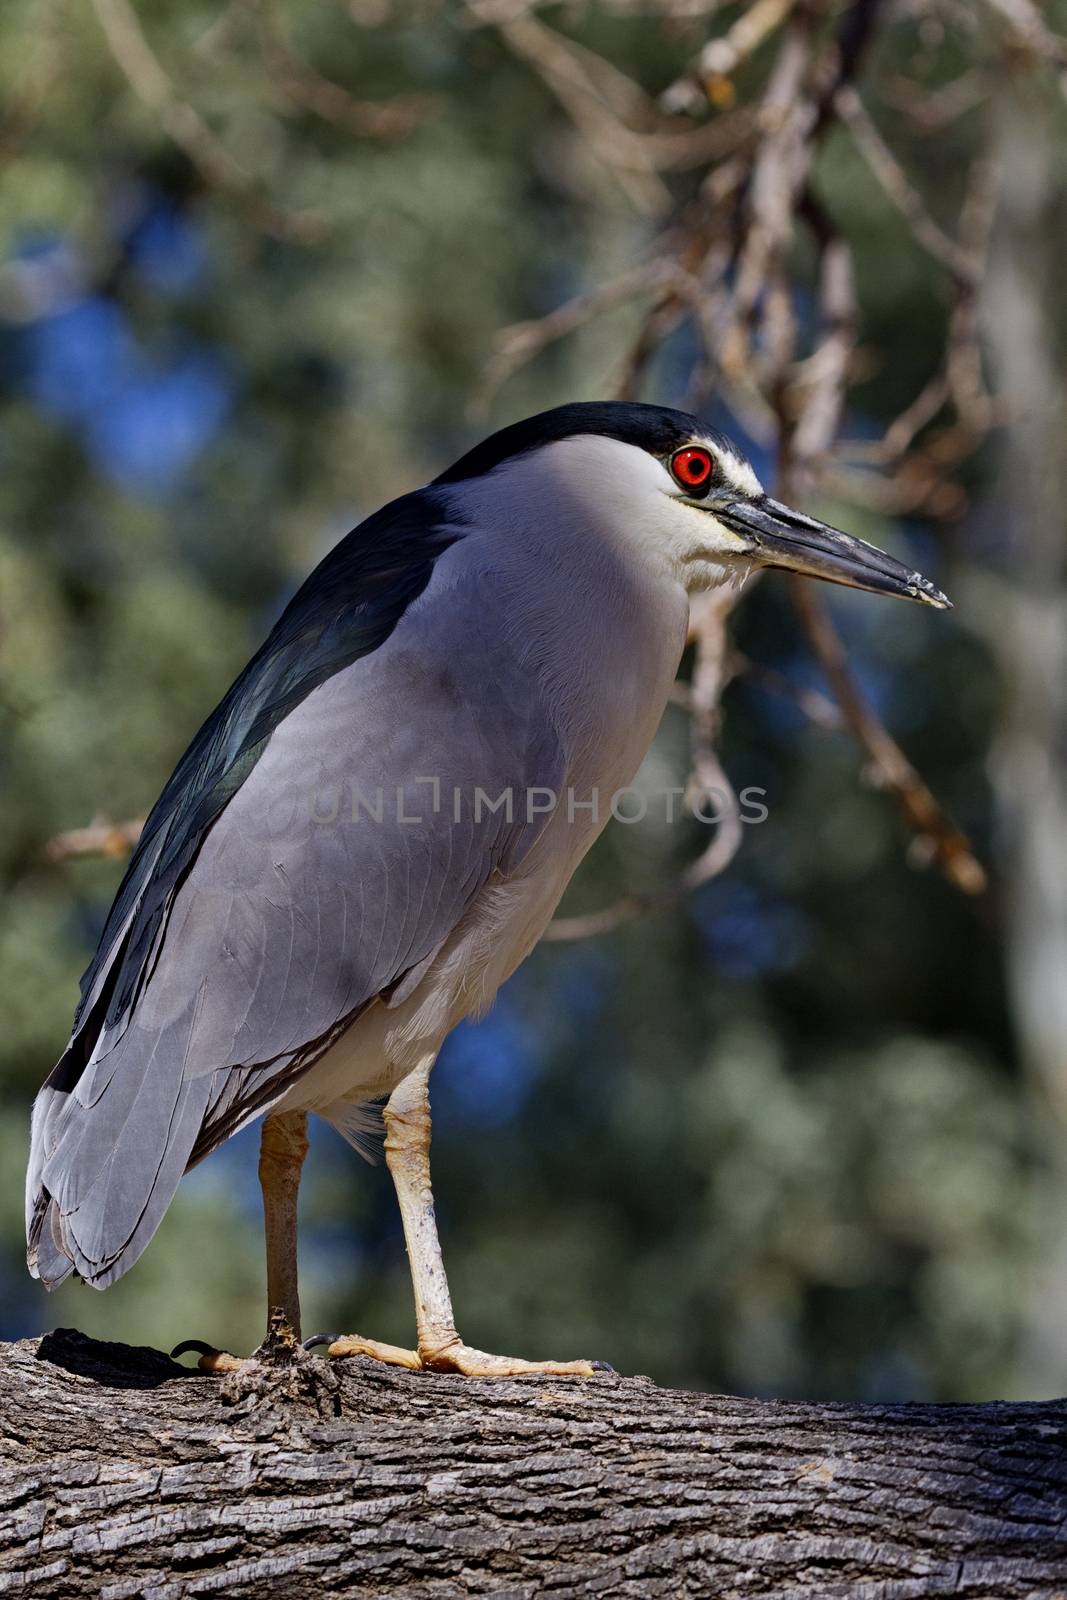 Adult male black crowned night heron stands on branch.  Pose of alert vigilance with trees in background. cation is Reid Park in Tucson, Arizona, on February 24, 2017. Field marks, long legs, and striking black, white, and gray plumage are visible in natural setting. 